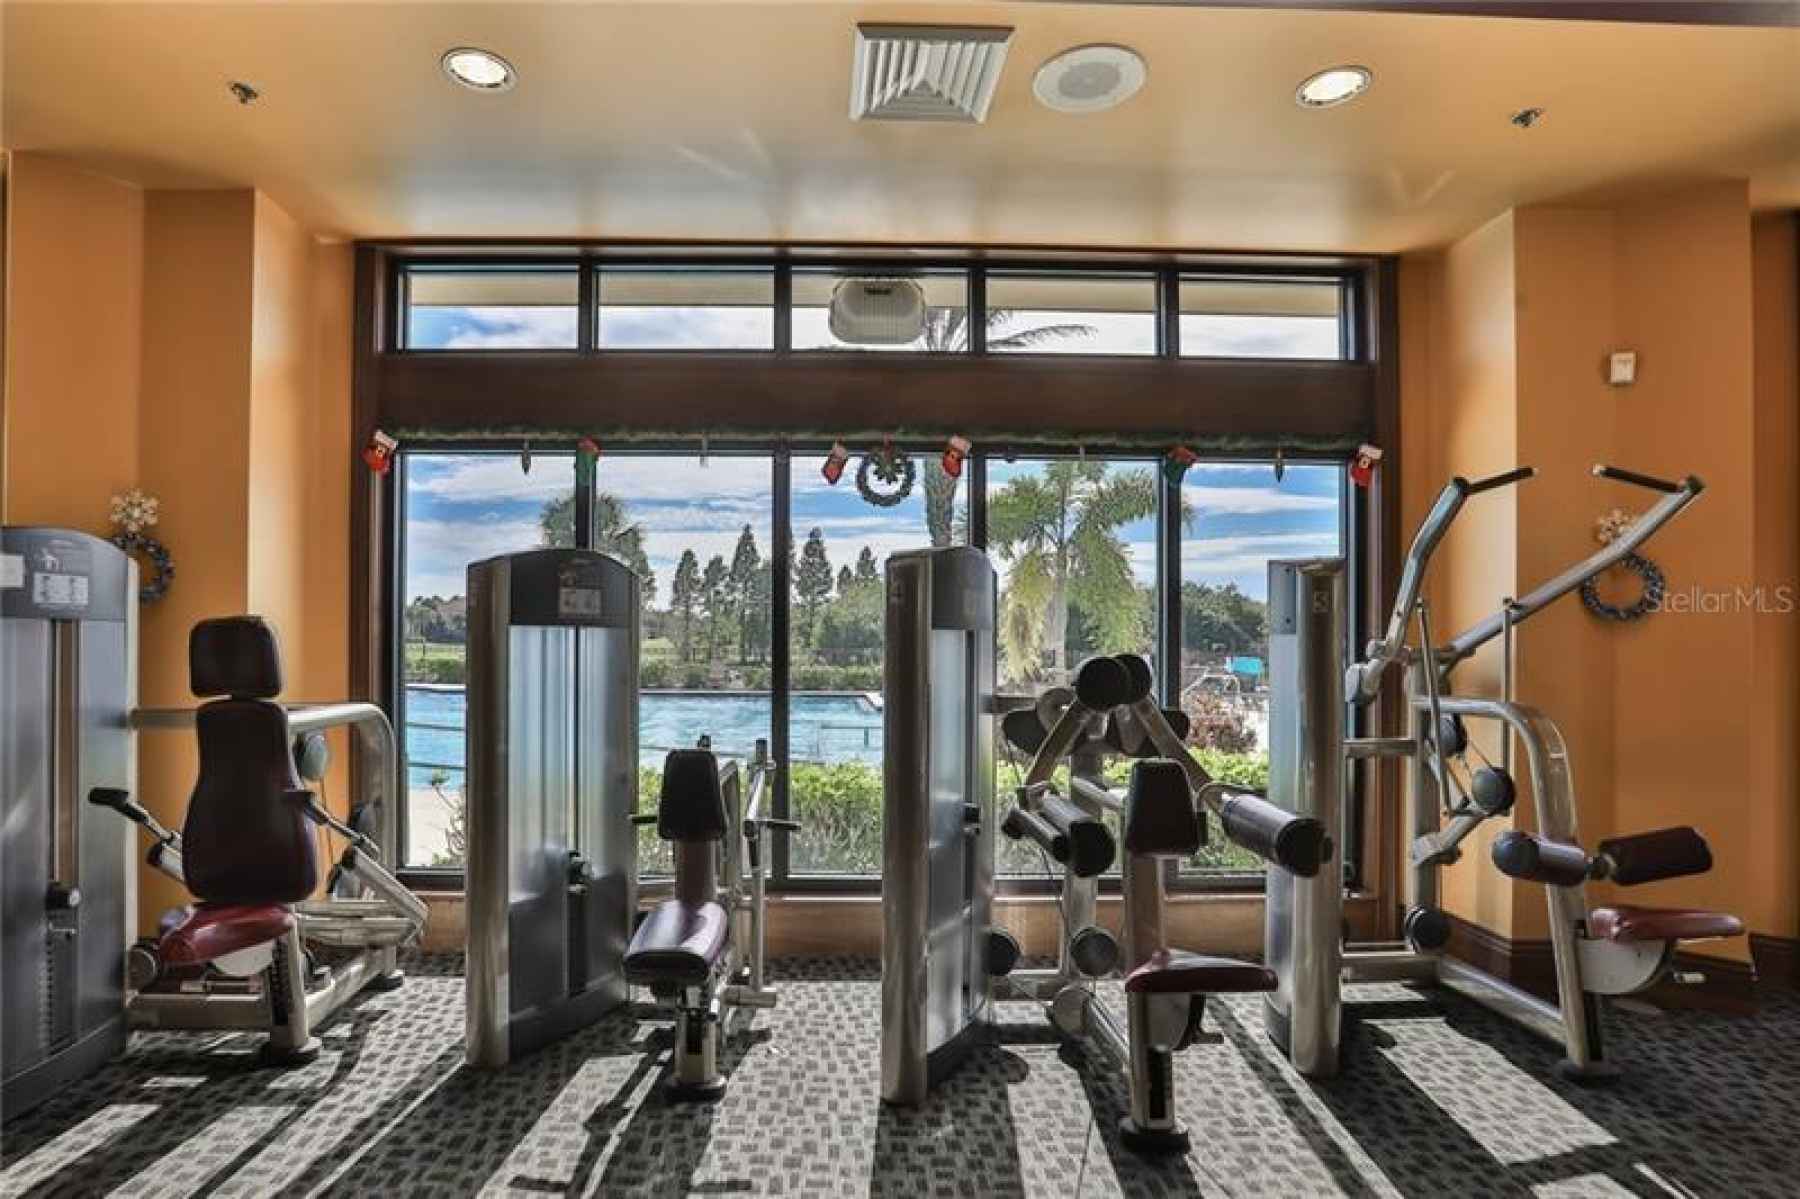 Renaissance Club Fitness Center.  Nice view while exercising.